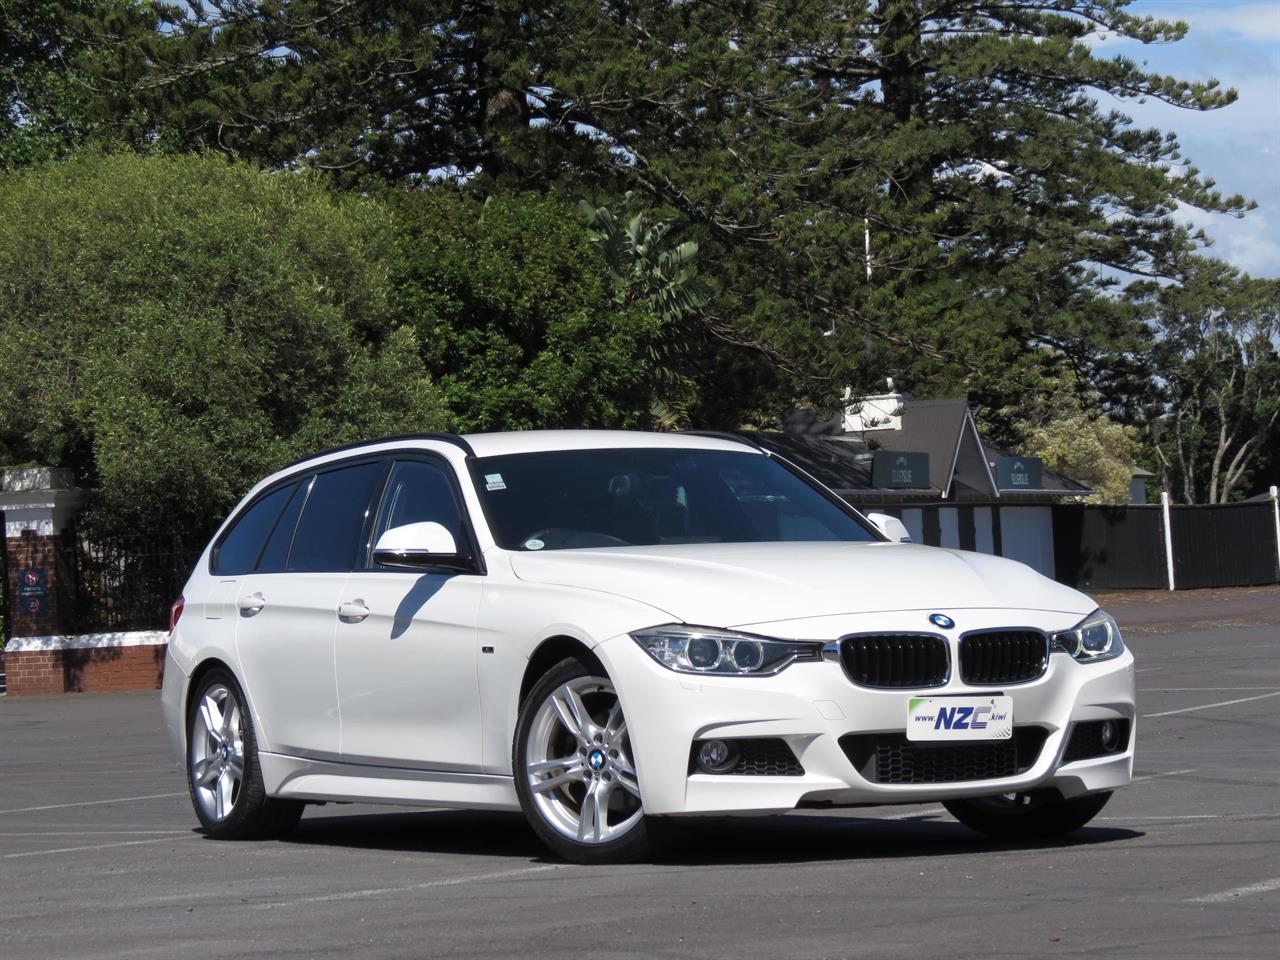 NZC best hot price for 2012 BMW 320d in Auckland